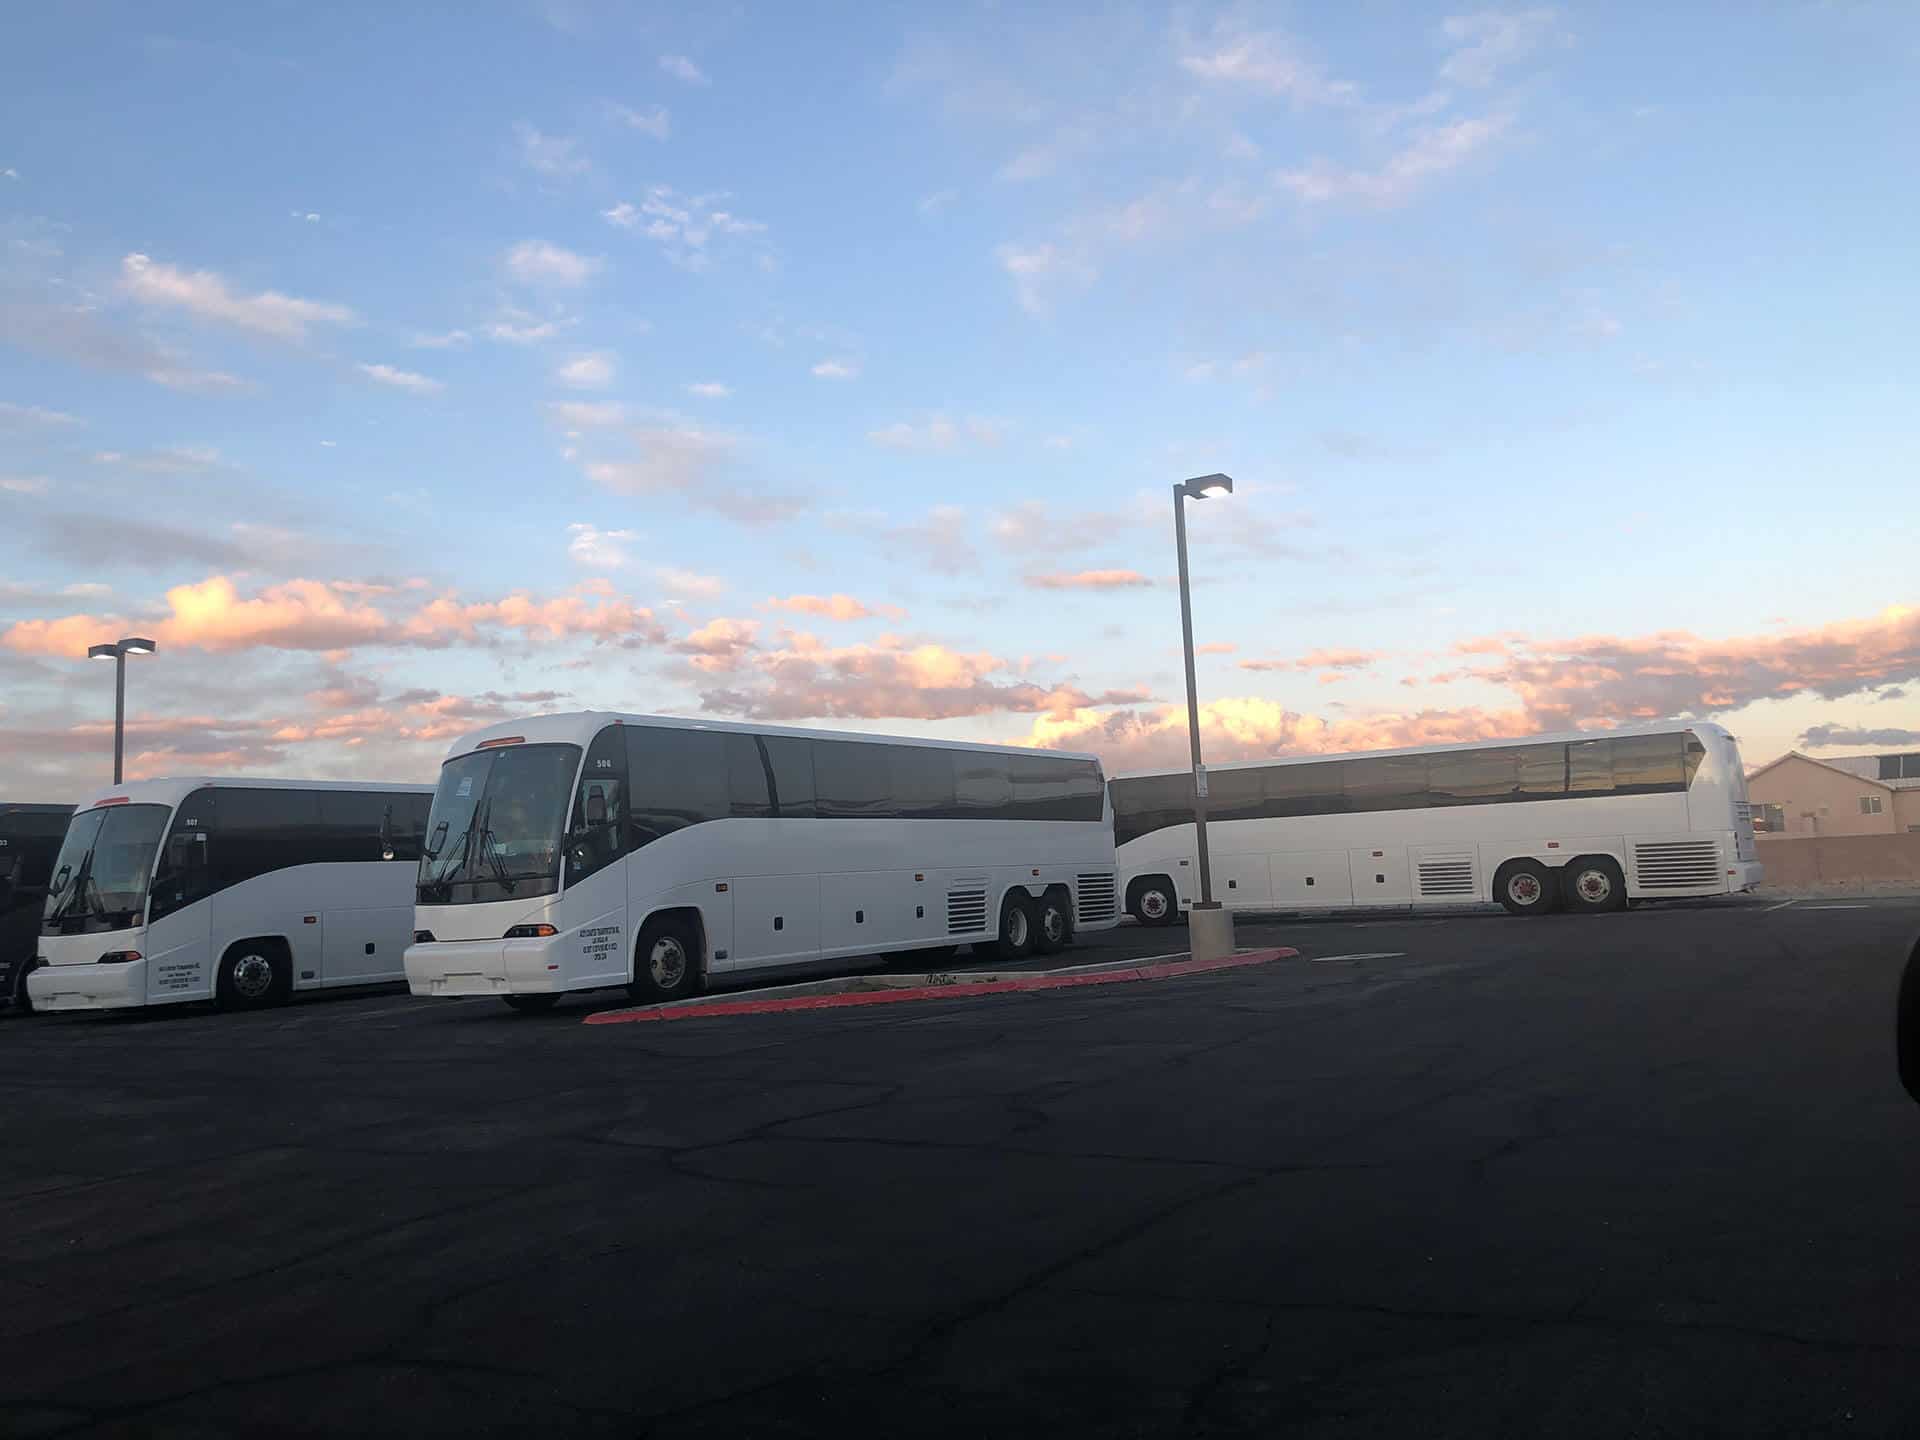 Three charter buses were parked in the afternoon